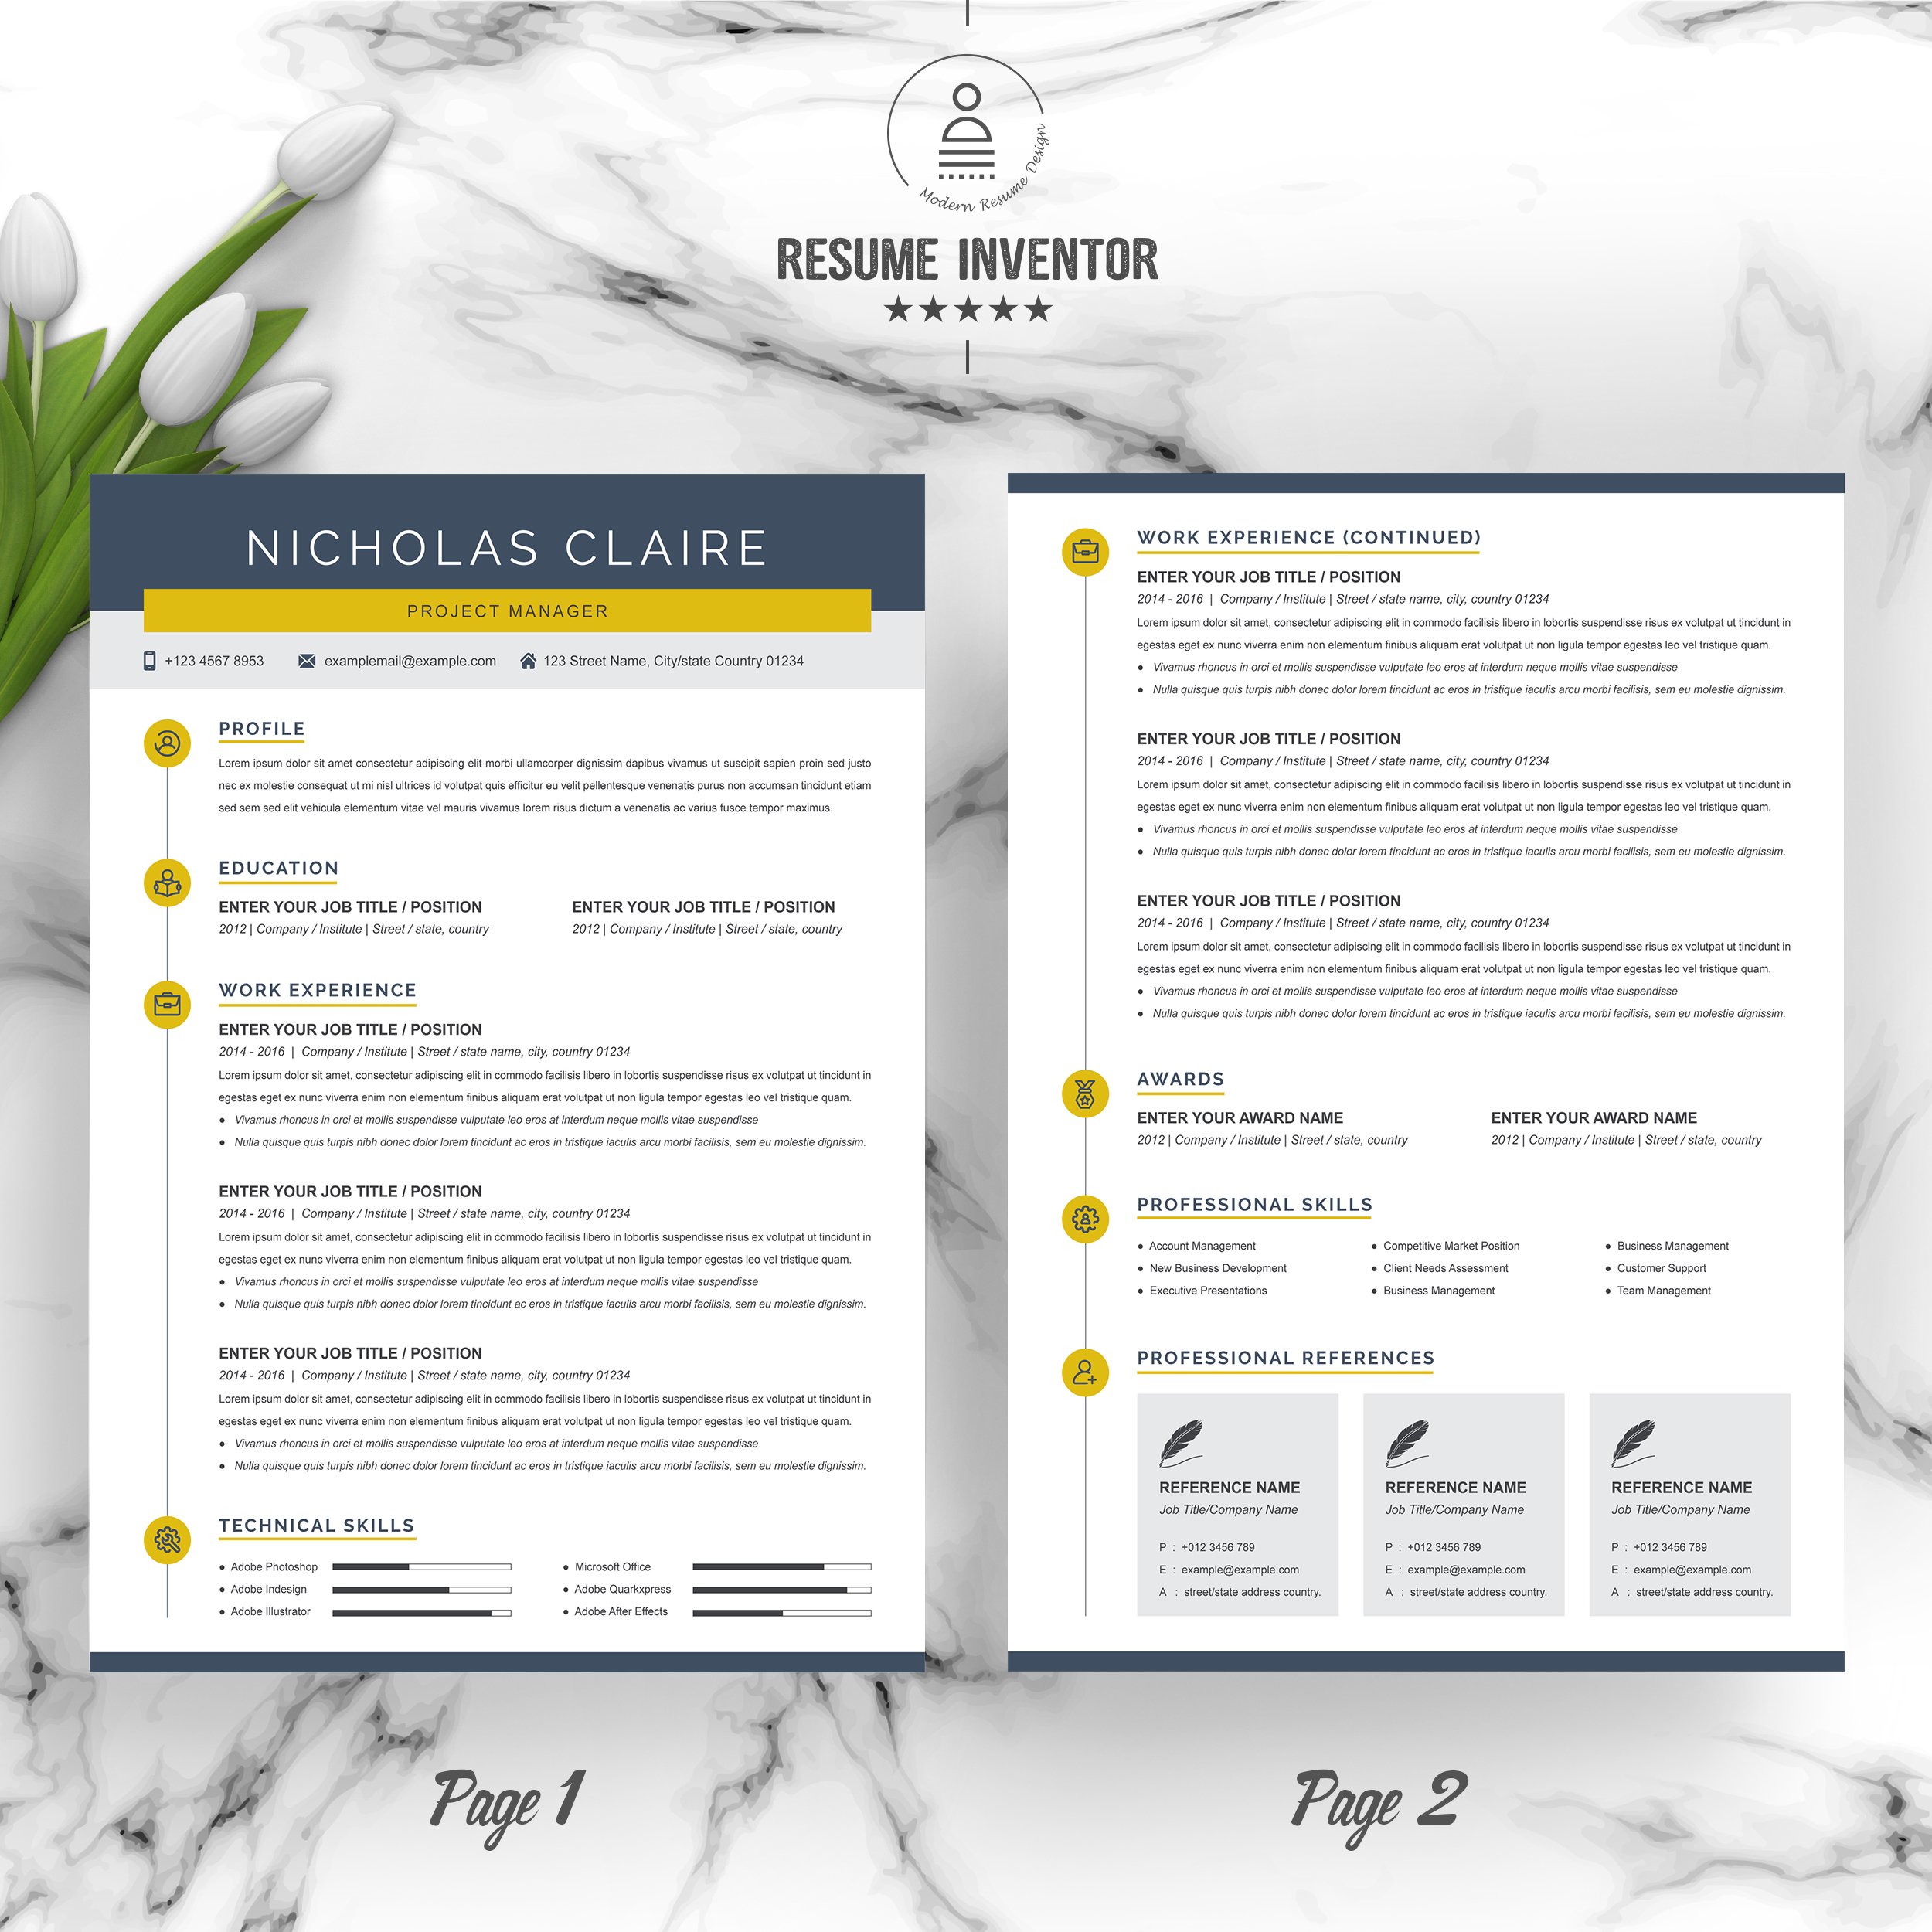 Project Manager Resume/CV Template preview image.